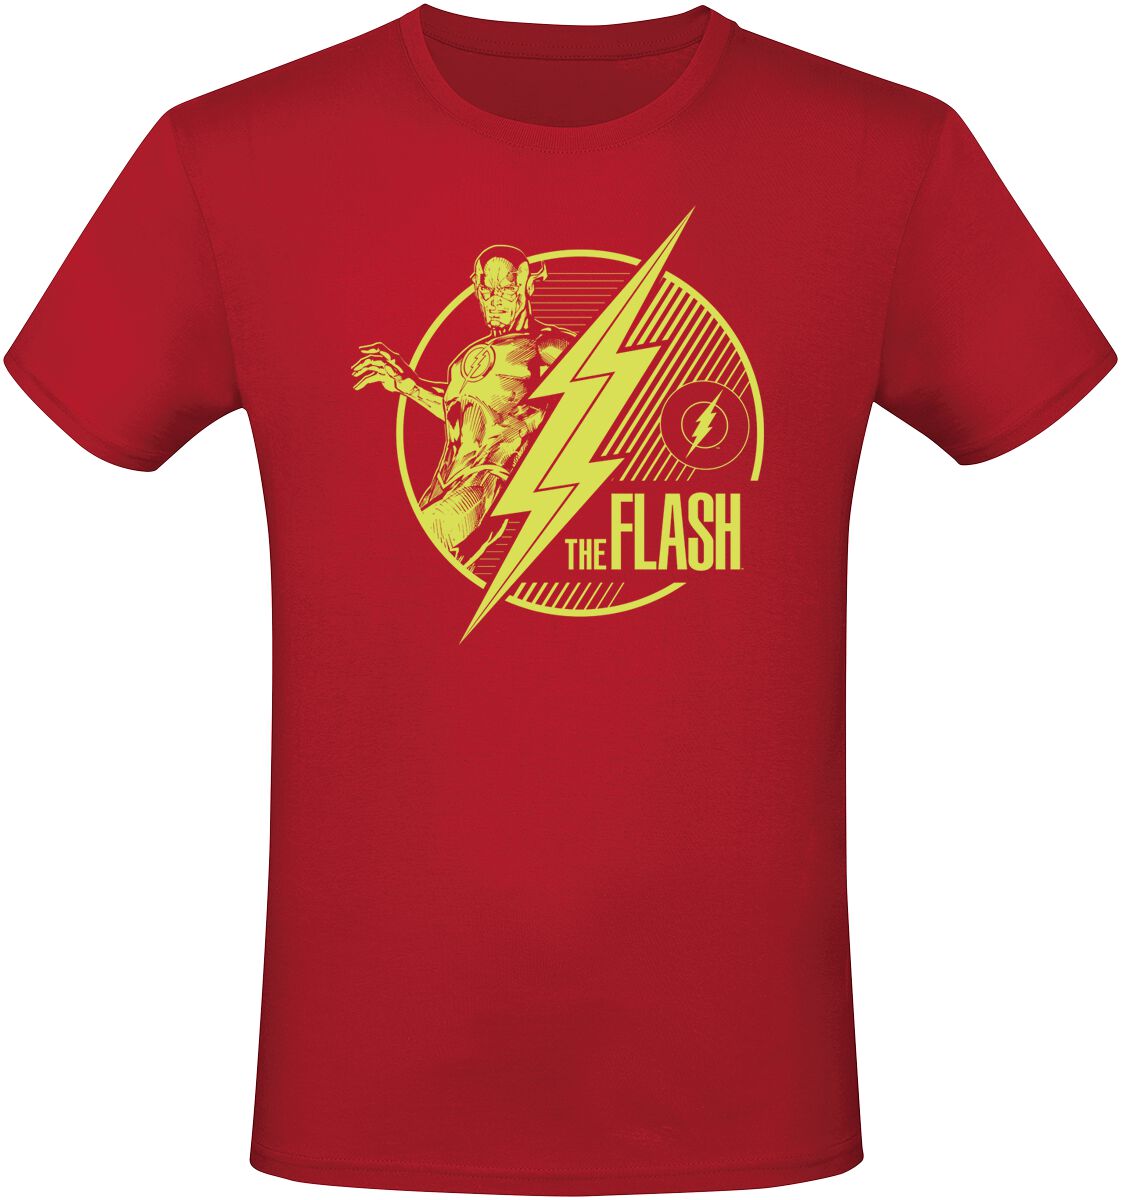 The Flash Flash T-Shirt rot in M